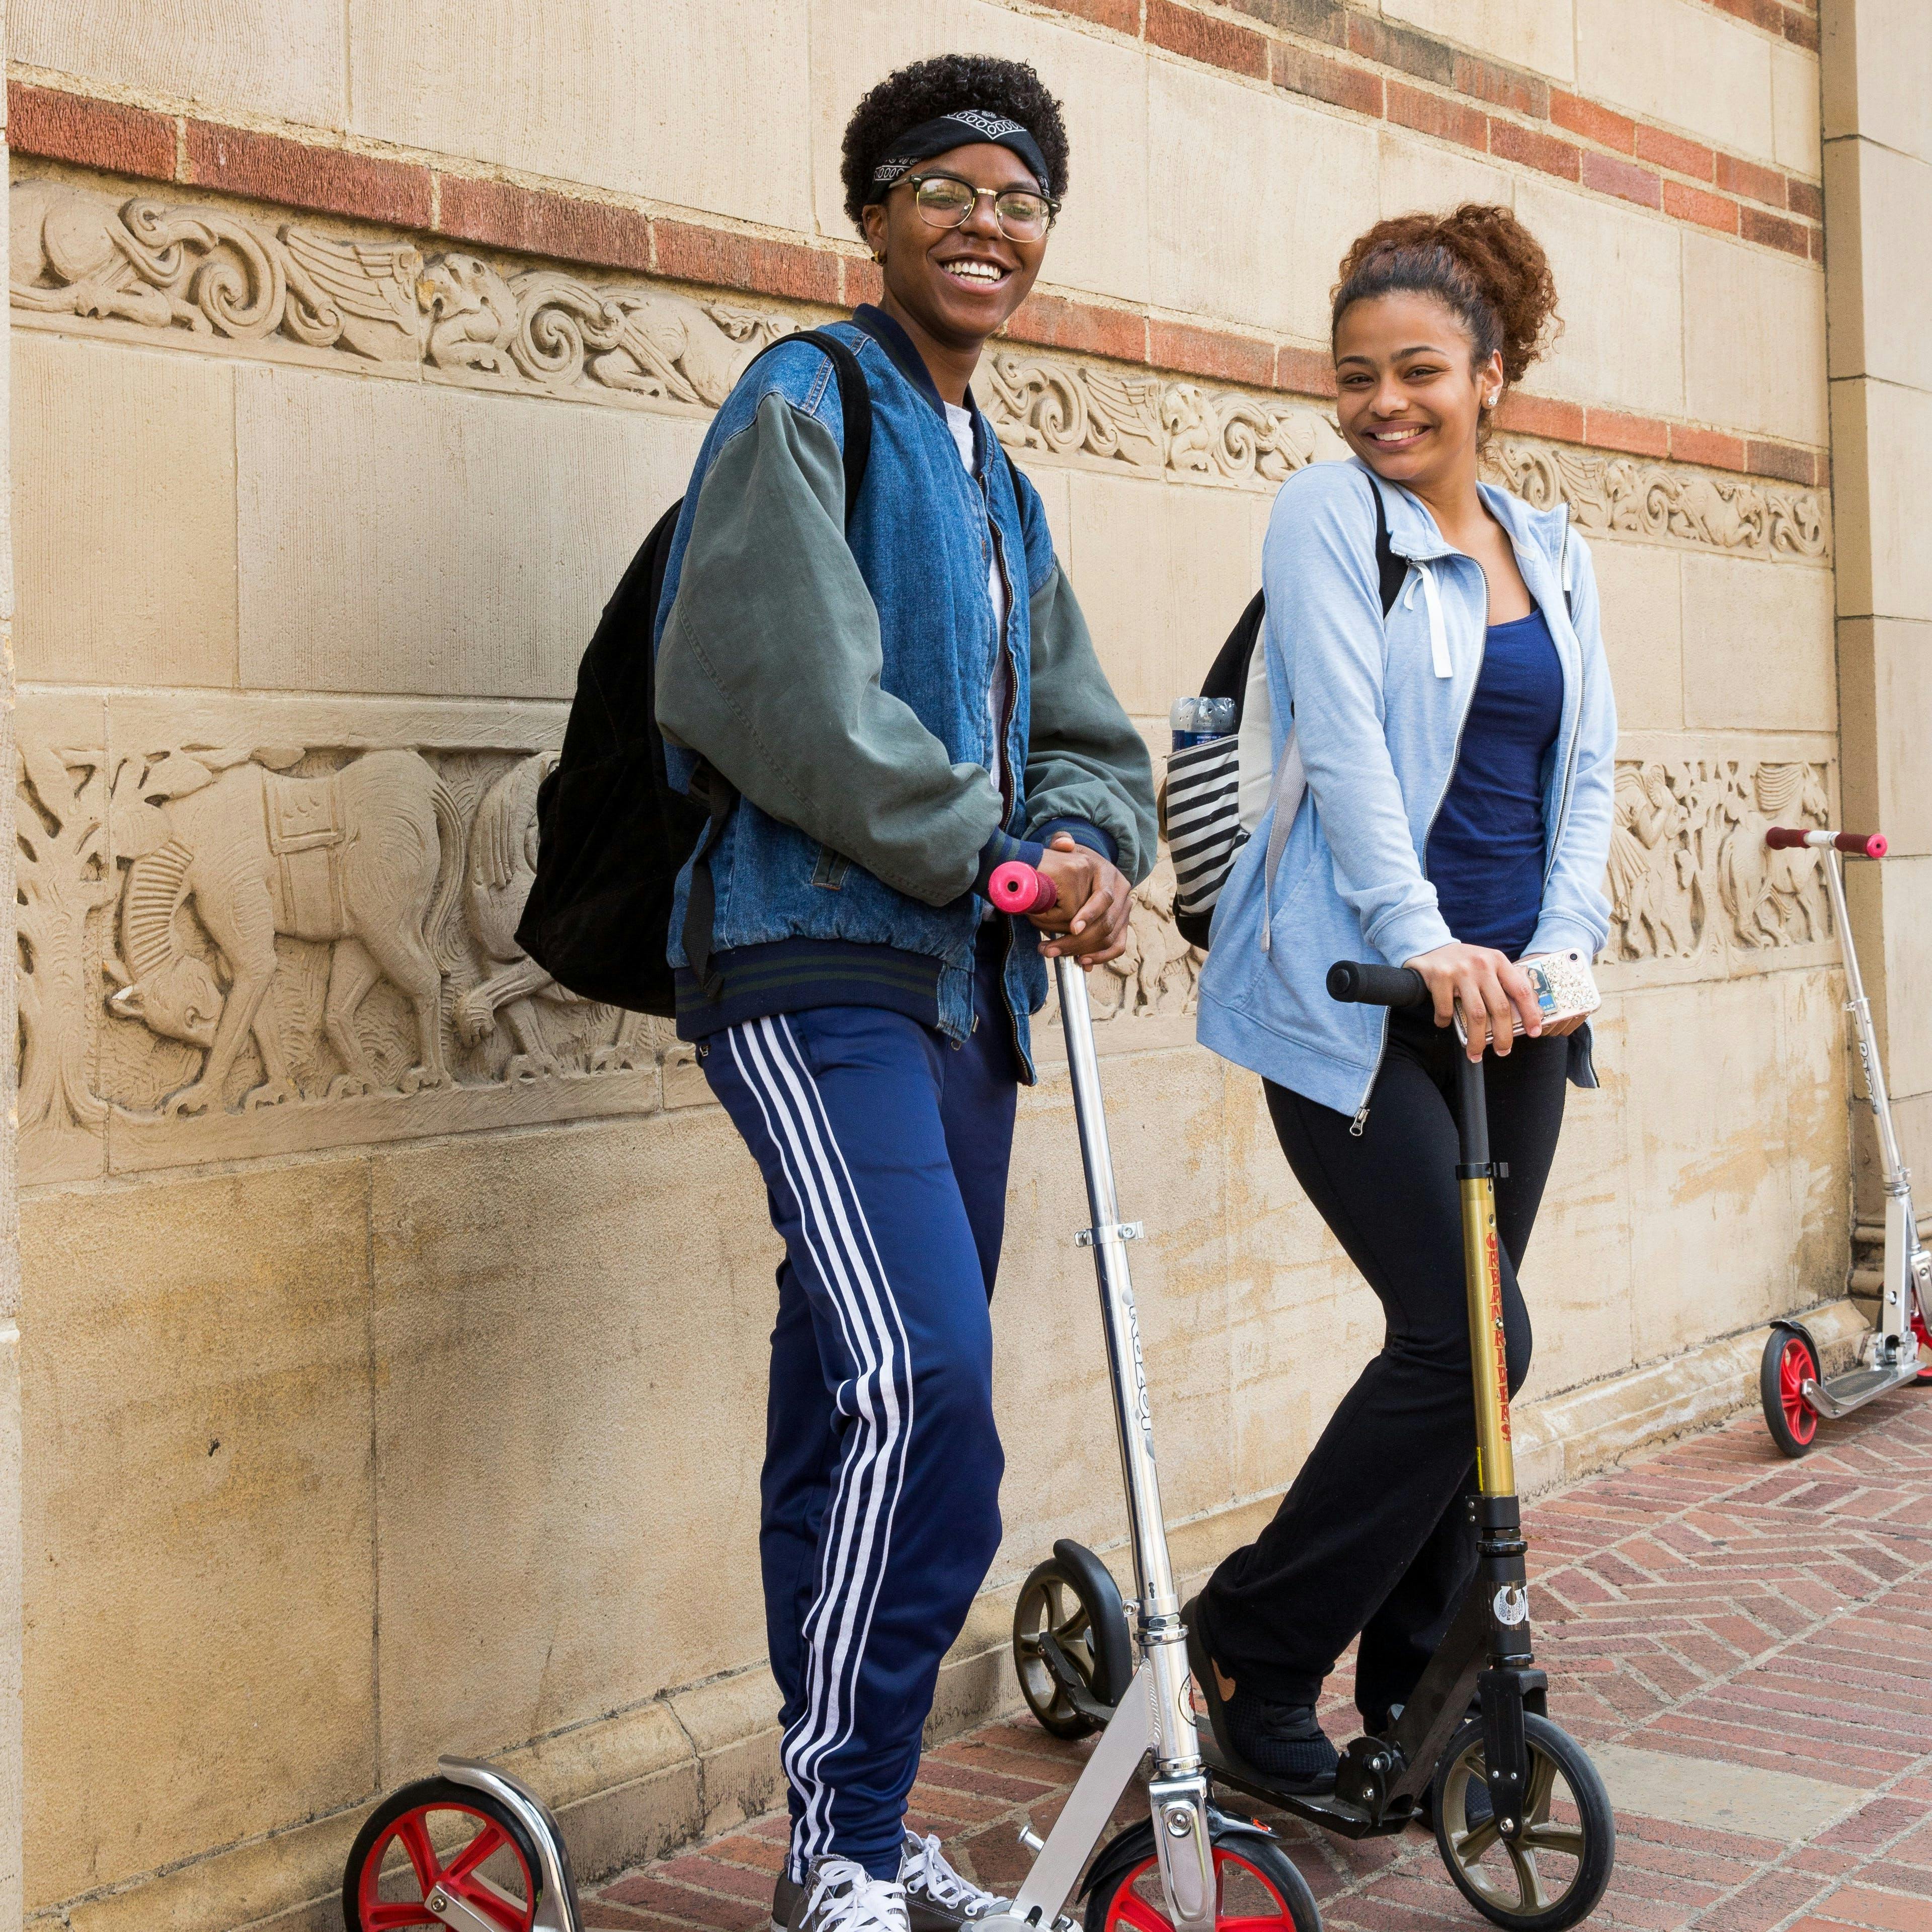 students riding a scooter